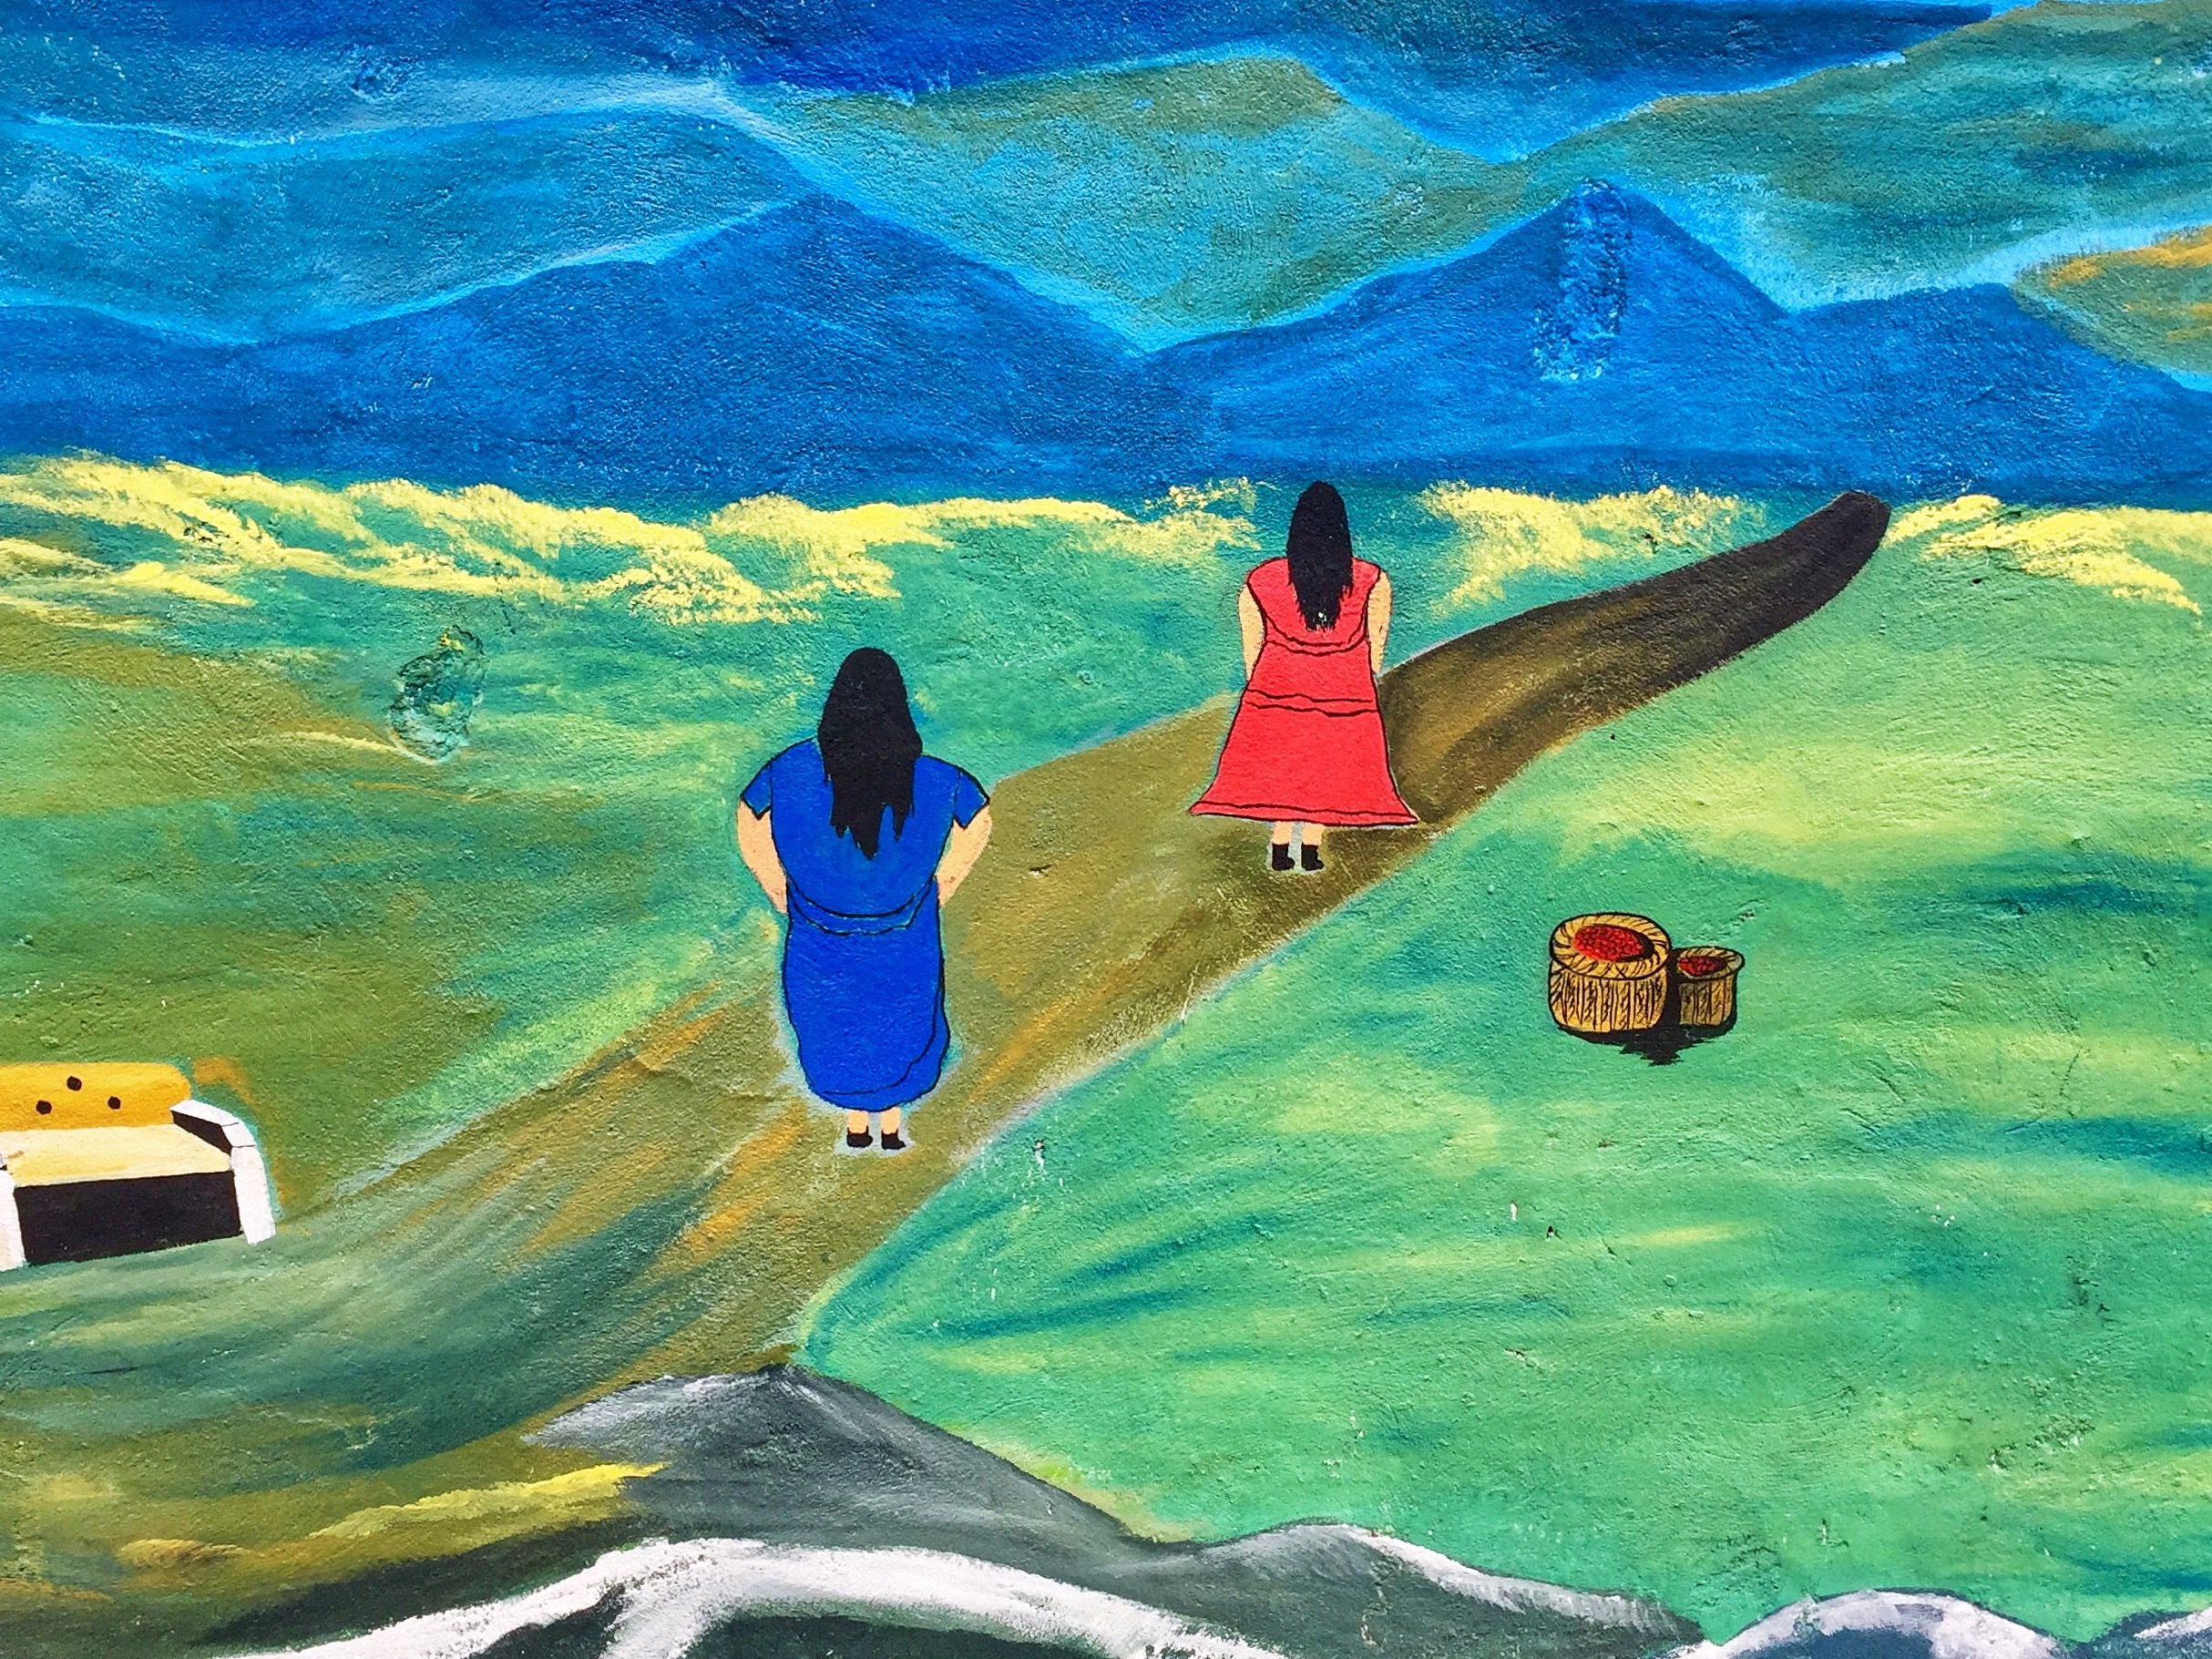 Mural in the capitol of Coto Brus depicts indigenous women, in traditional clothing, making the long journey into the mountainous terrain of Southern Costa Rica and Panama. Image by Samira Tella. Costa Rica, 2018.